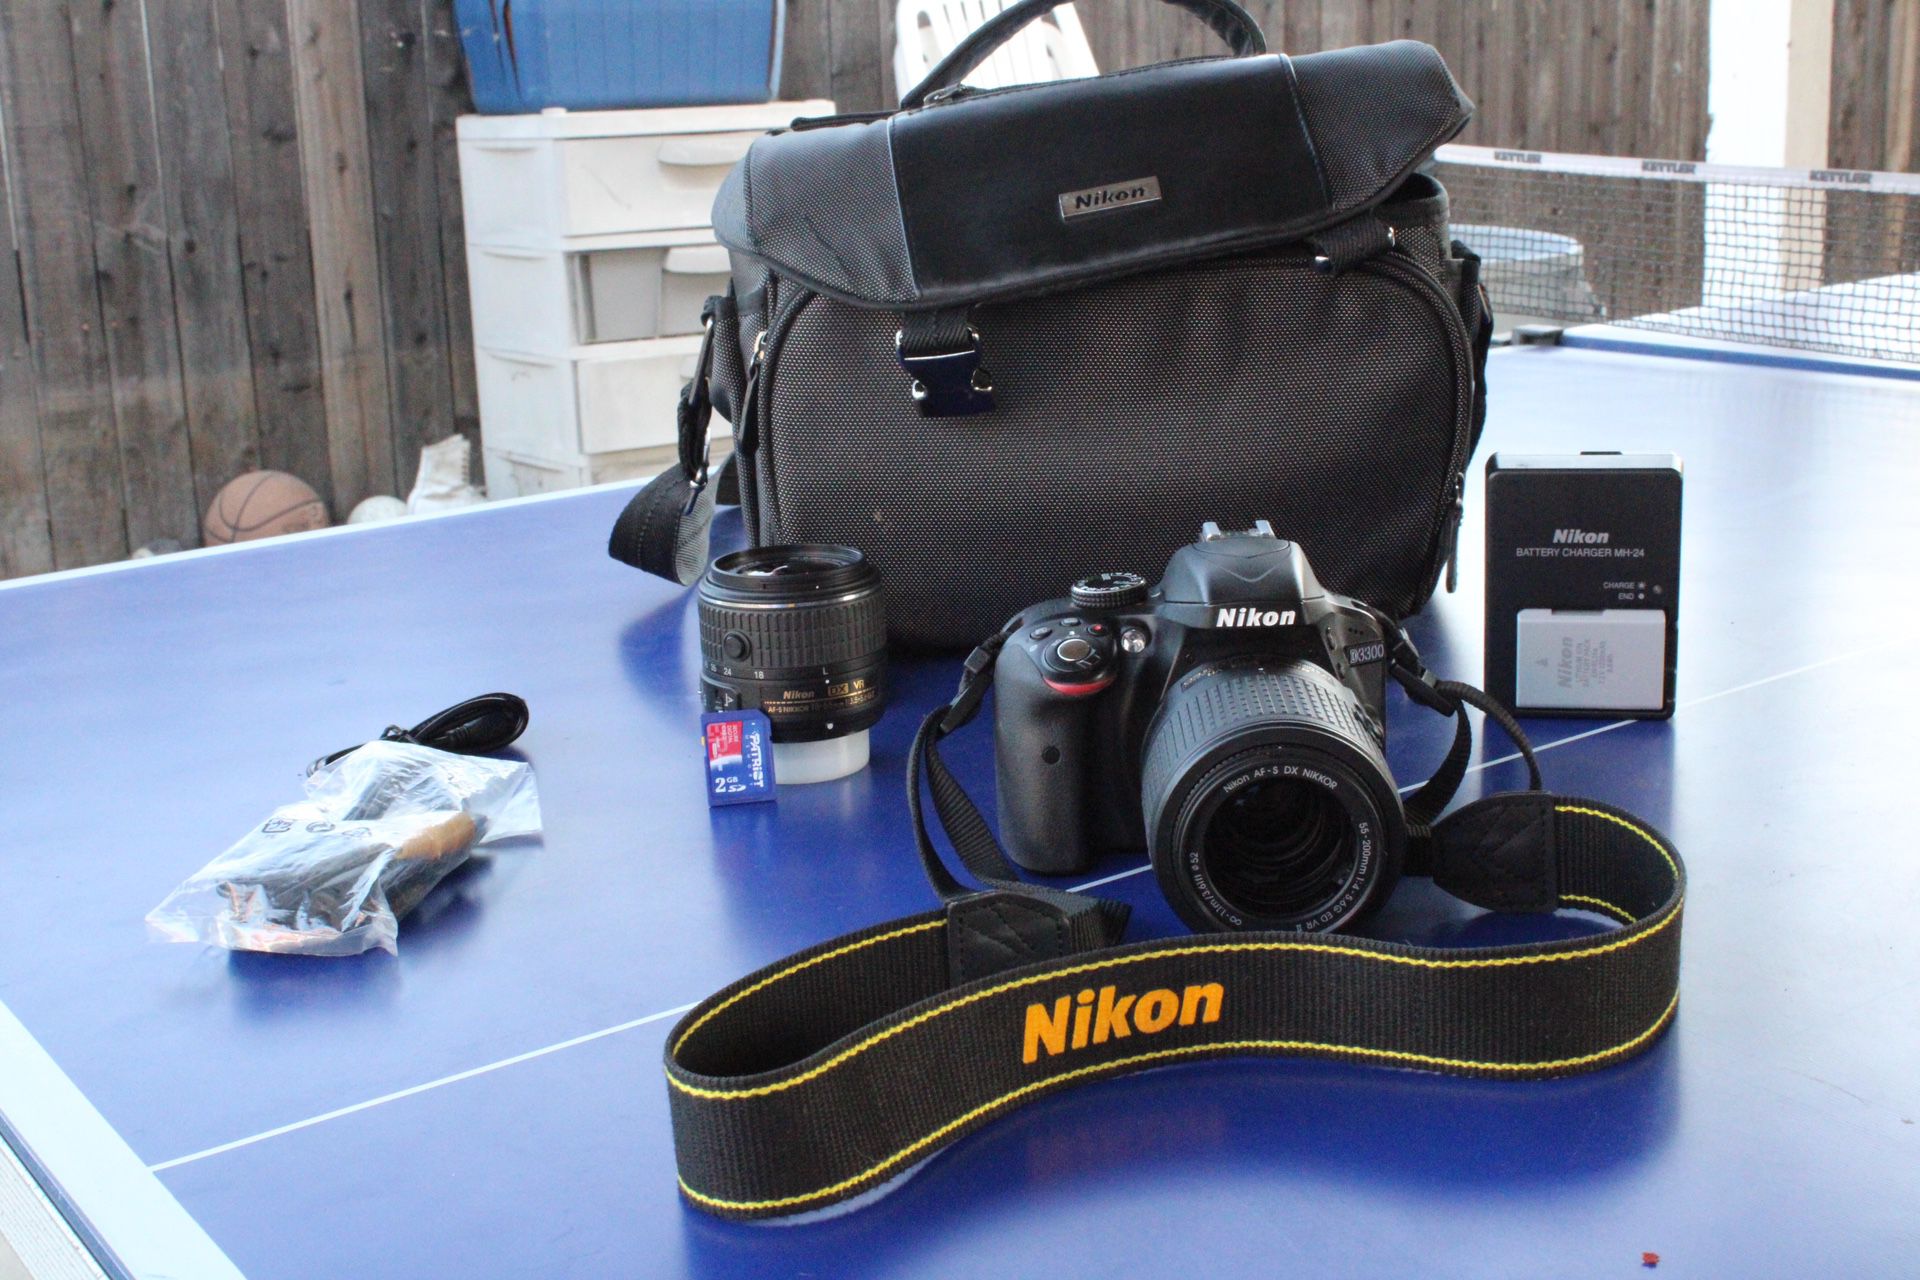 NIKON D3300,55-200mm lens,SD CARD,CHARGER,CABLES,CUSTAMIZABLE CASE!!!!